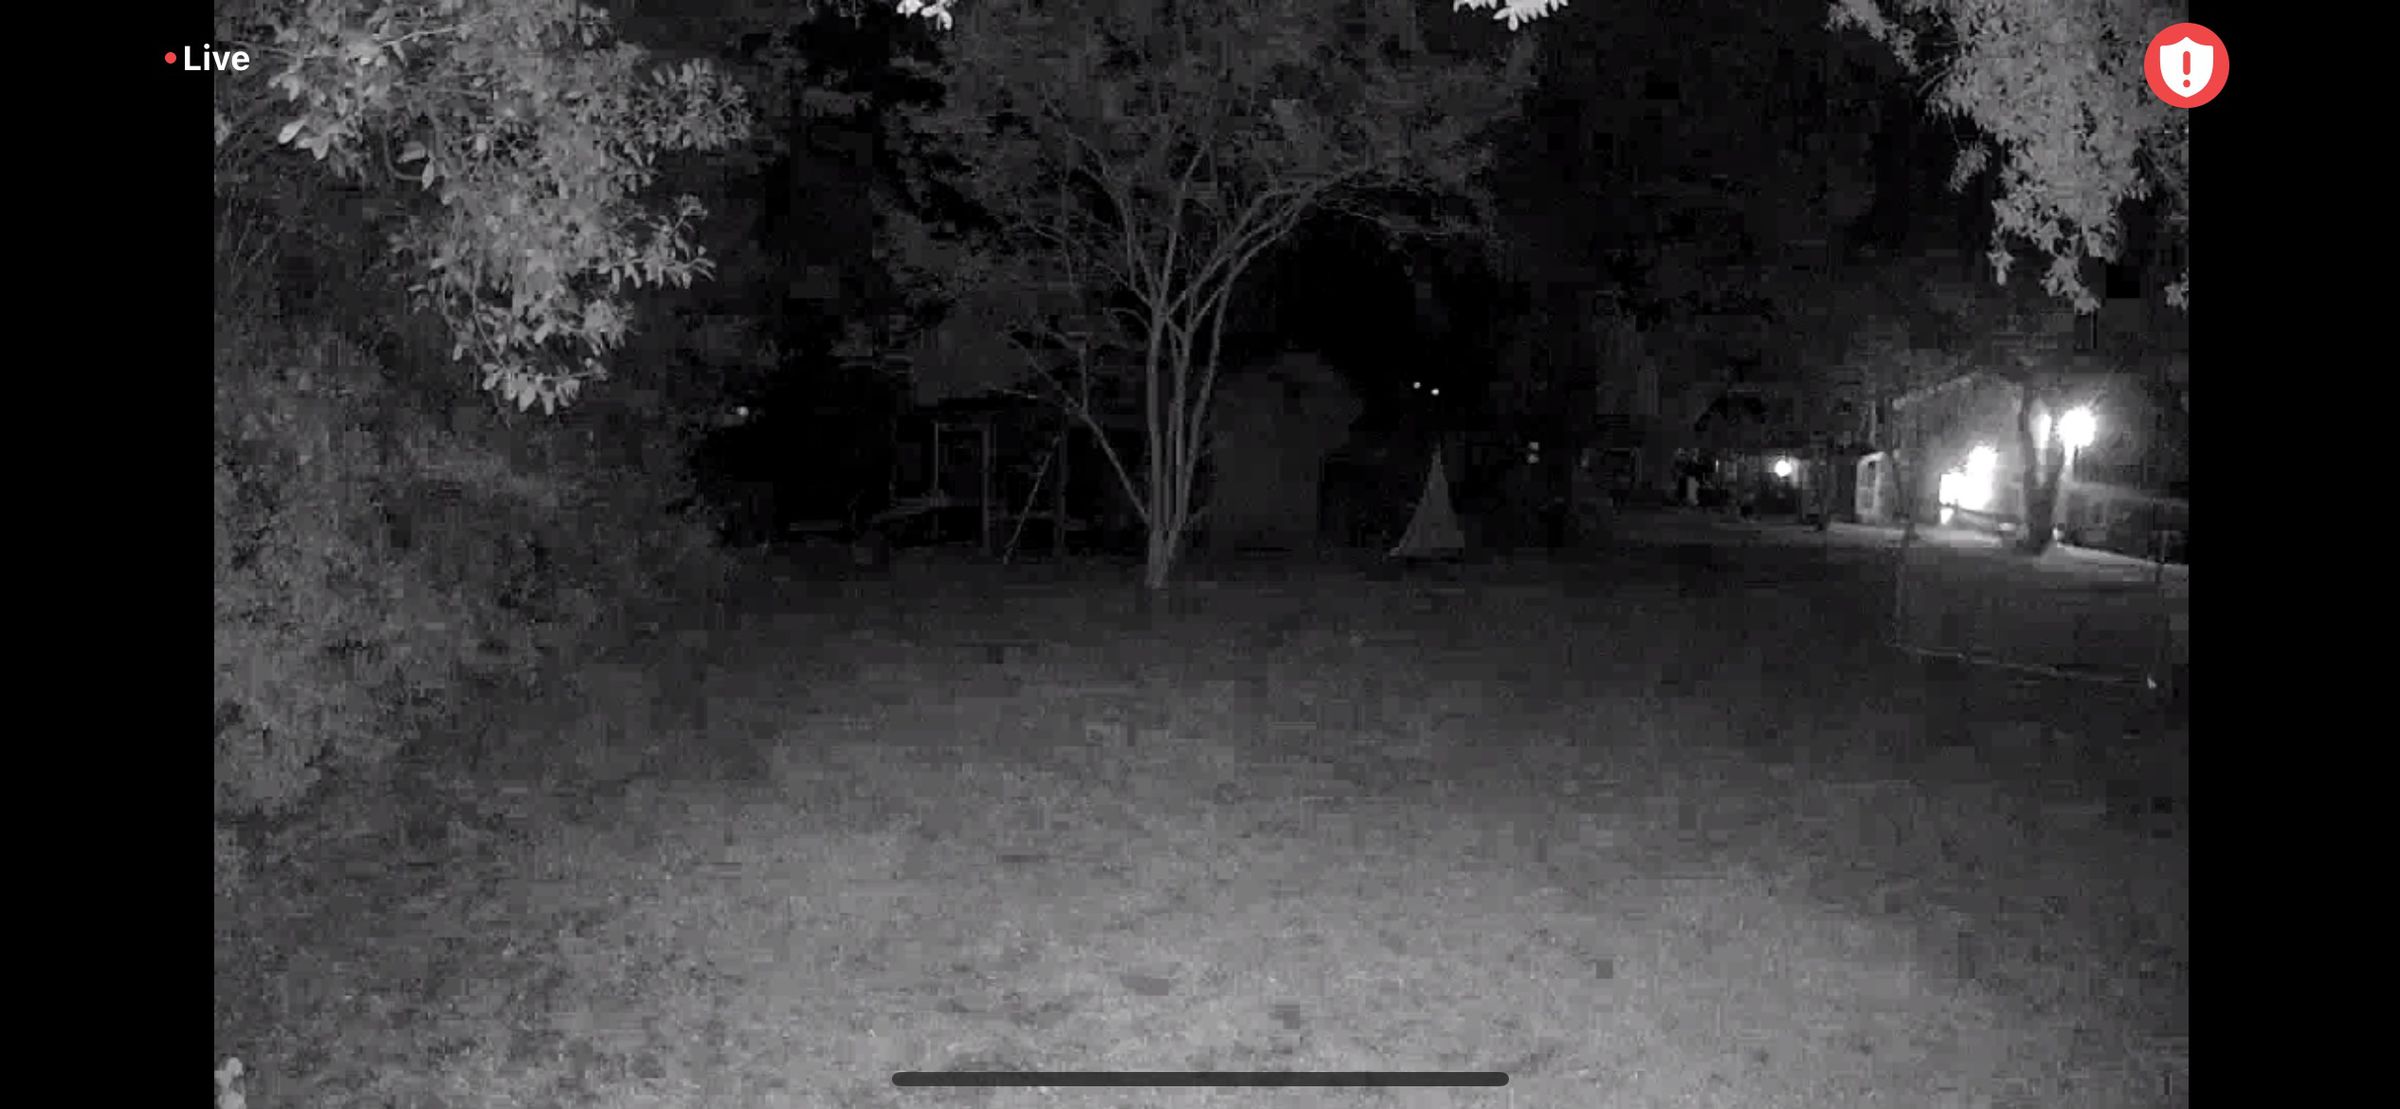 Arlo Go 2 infrared nighttime footage, which is much clearer than the spotlight footage.